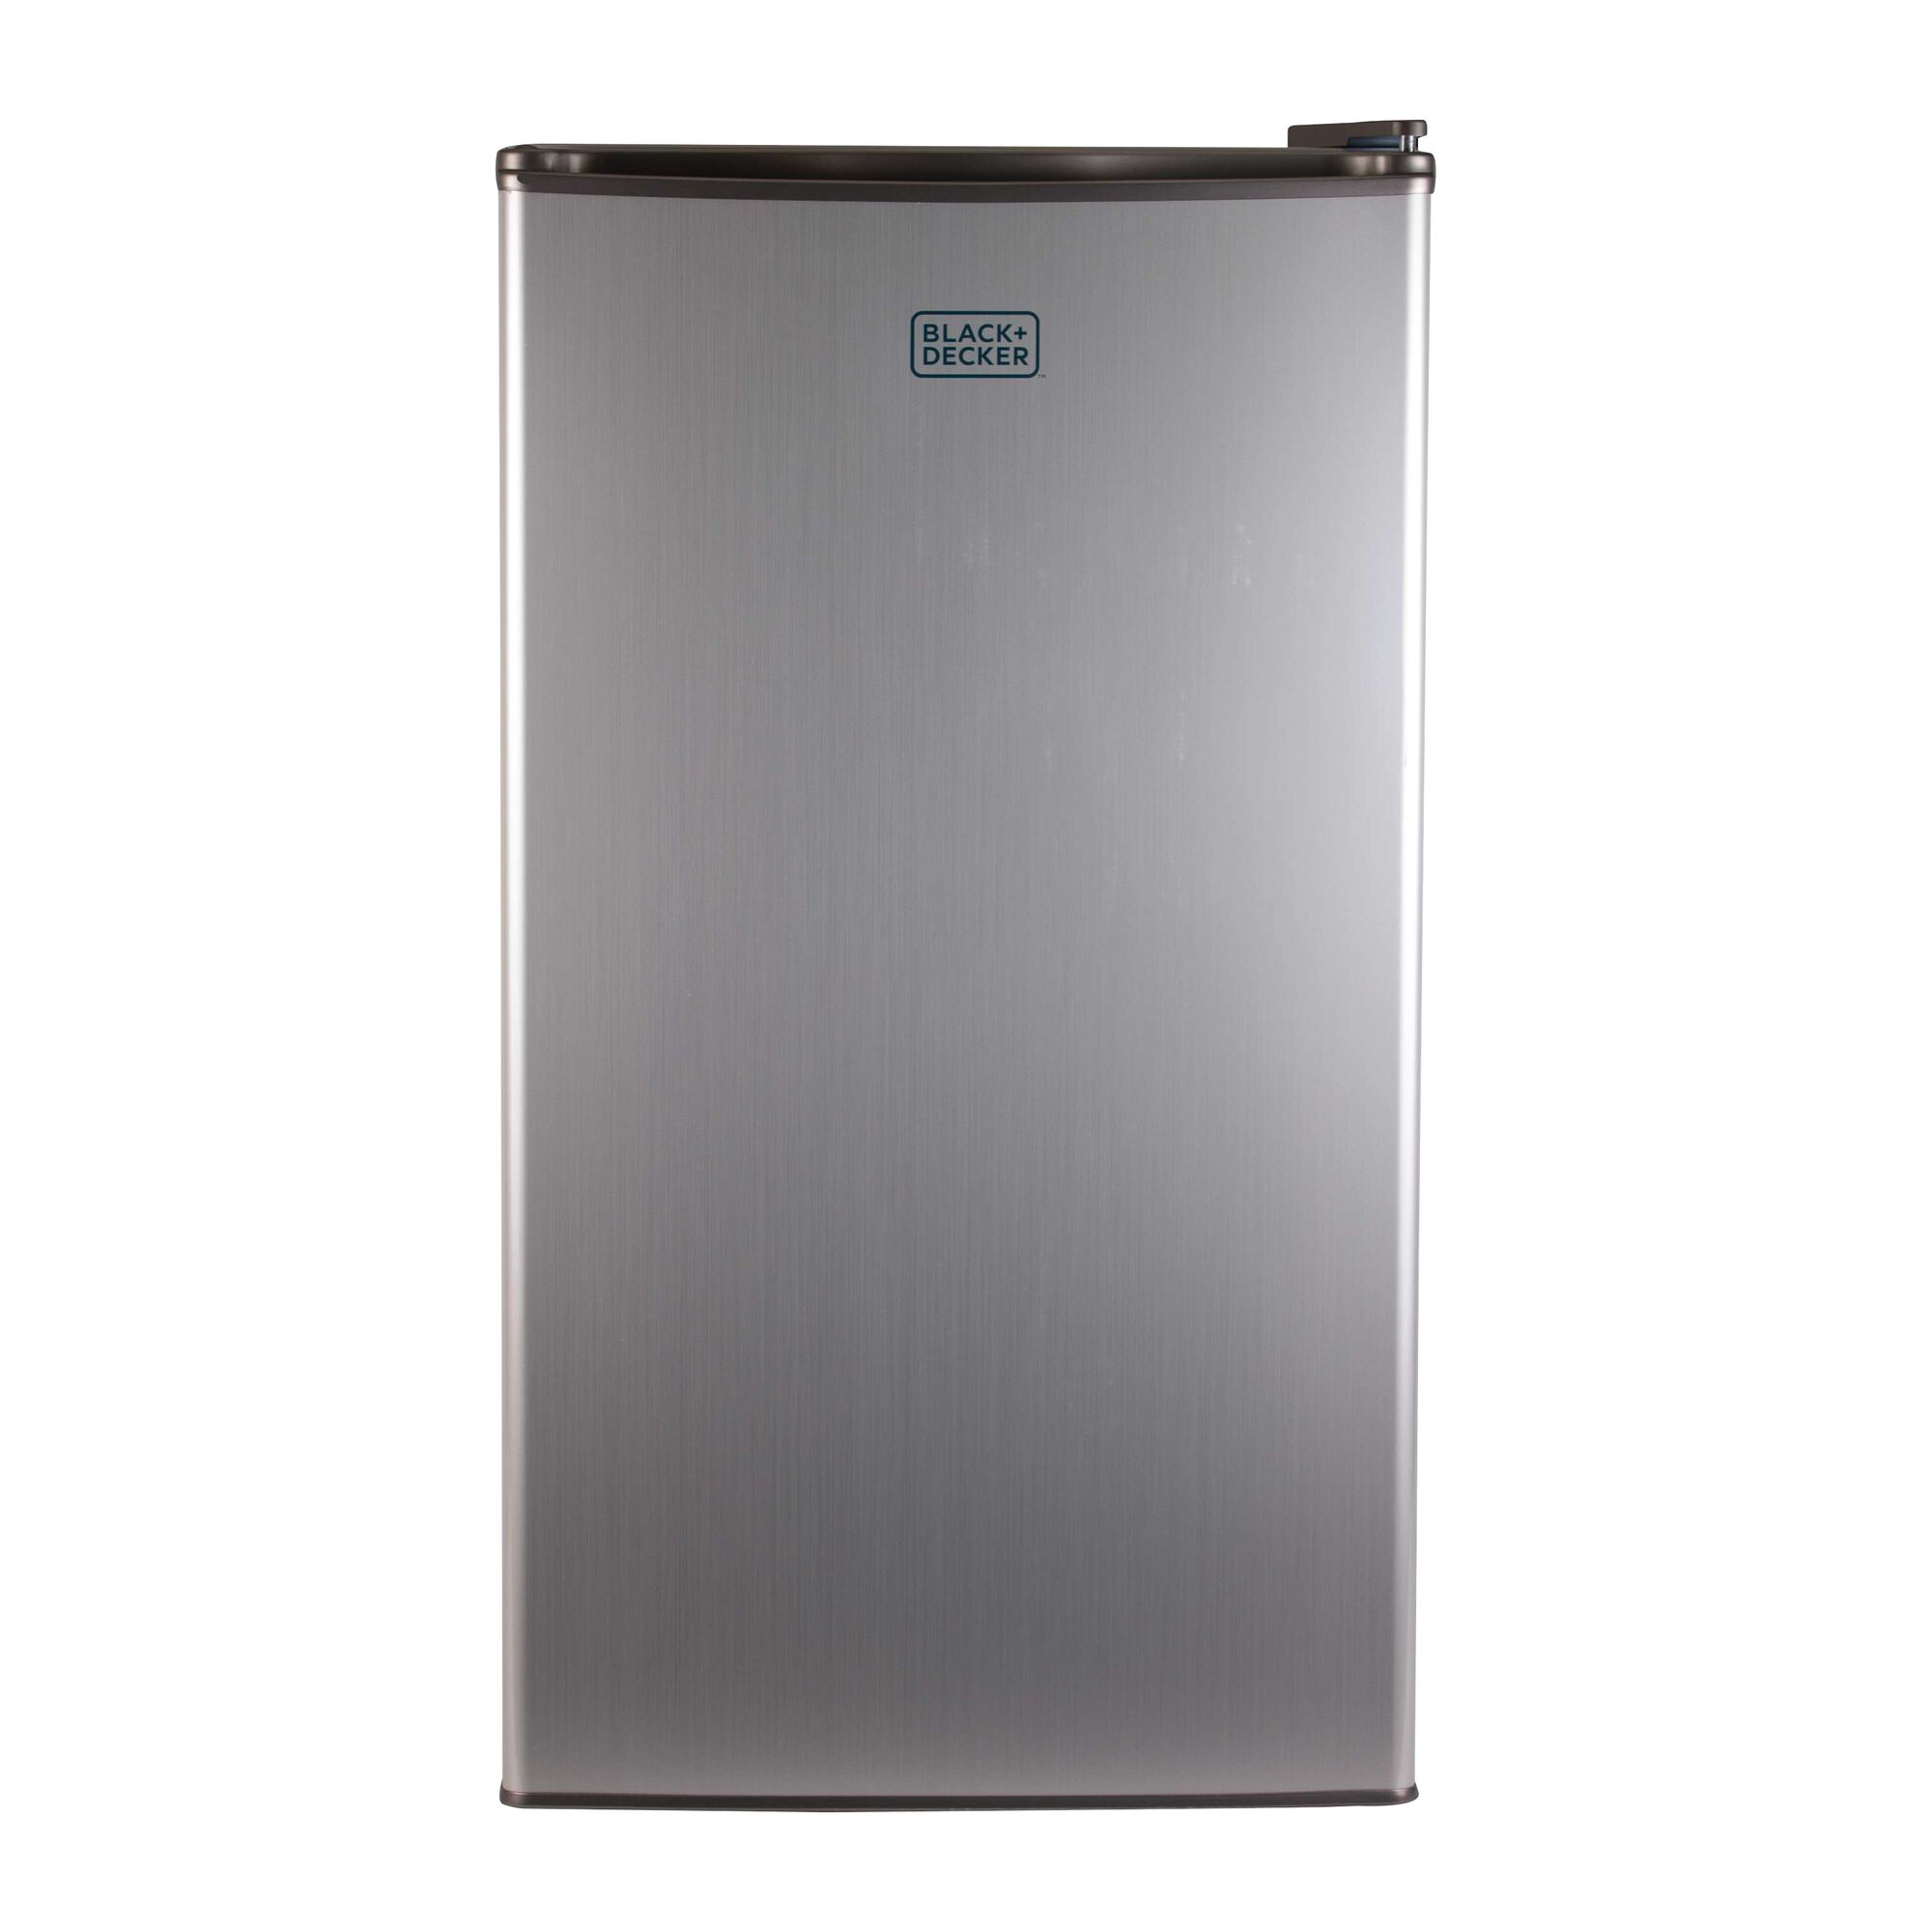 Profile of closed 3.2 Cubic feet energy star refrigerator with freezer.